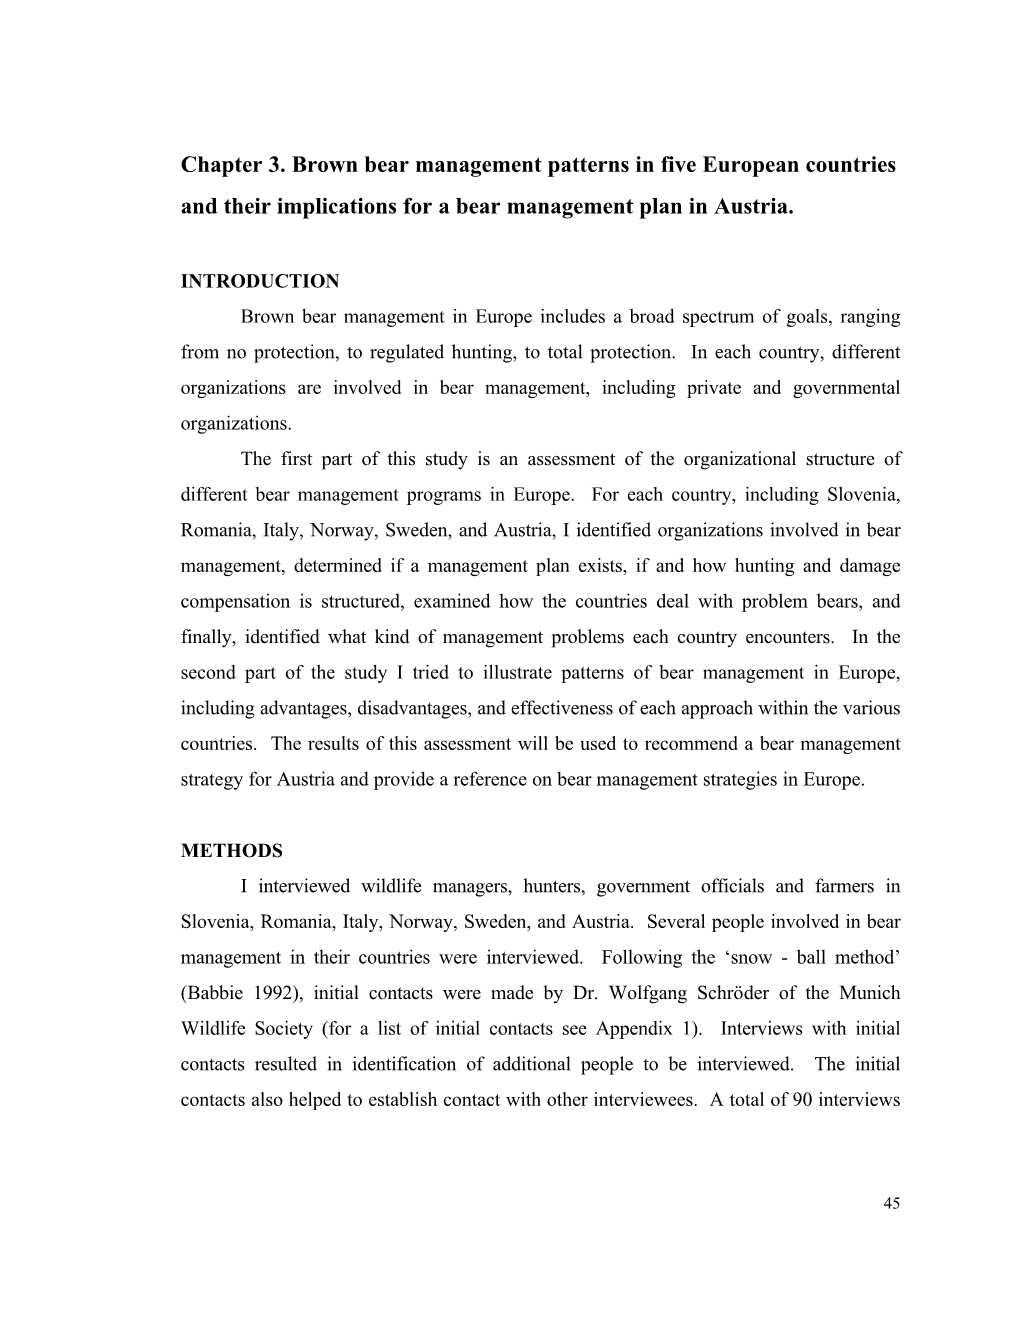 Chapter 3. Brown Bear Management Patterns in Five European Countries and Their Implications for a Bear Management Plan in Austria